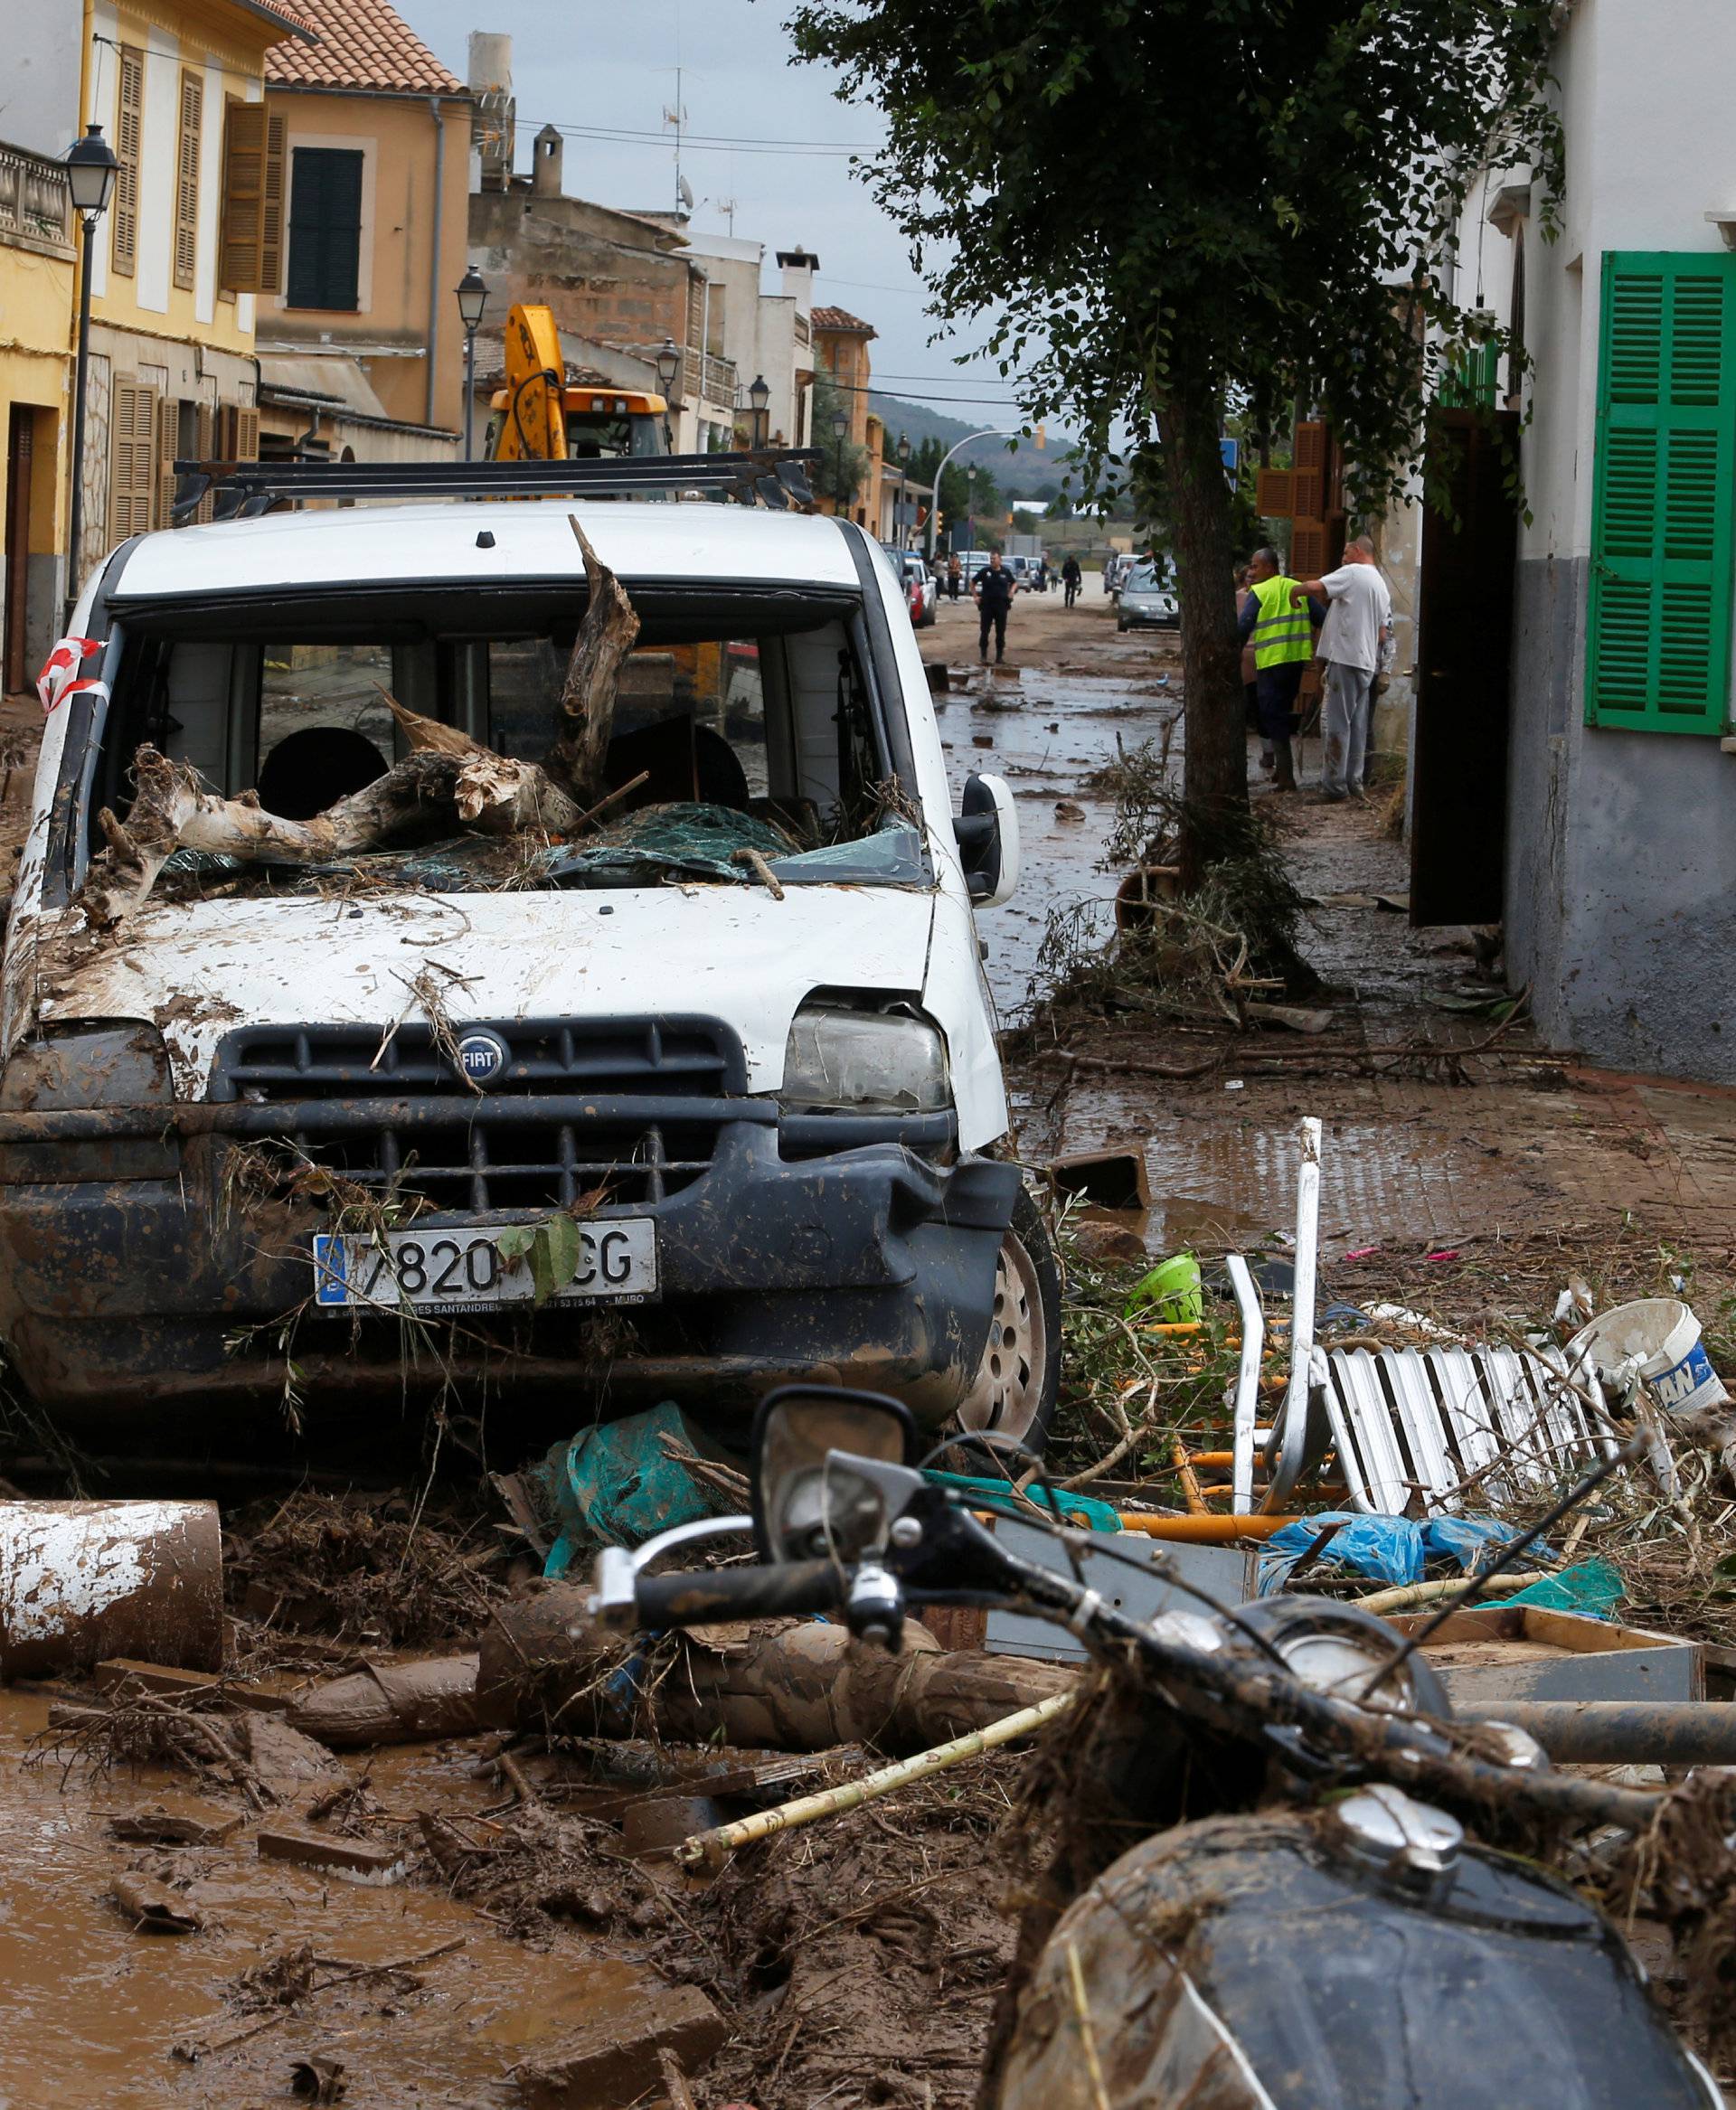 A destroyed car and debris are seen on the street as heavy rain and flash floods hit Sant Llorenc de Cardassar on the island of Mallorca